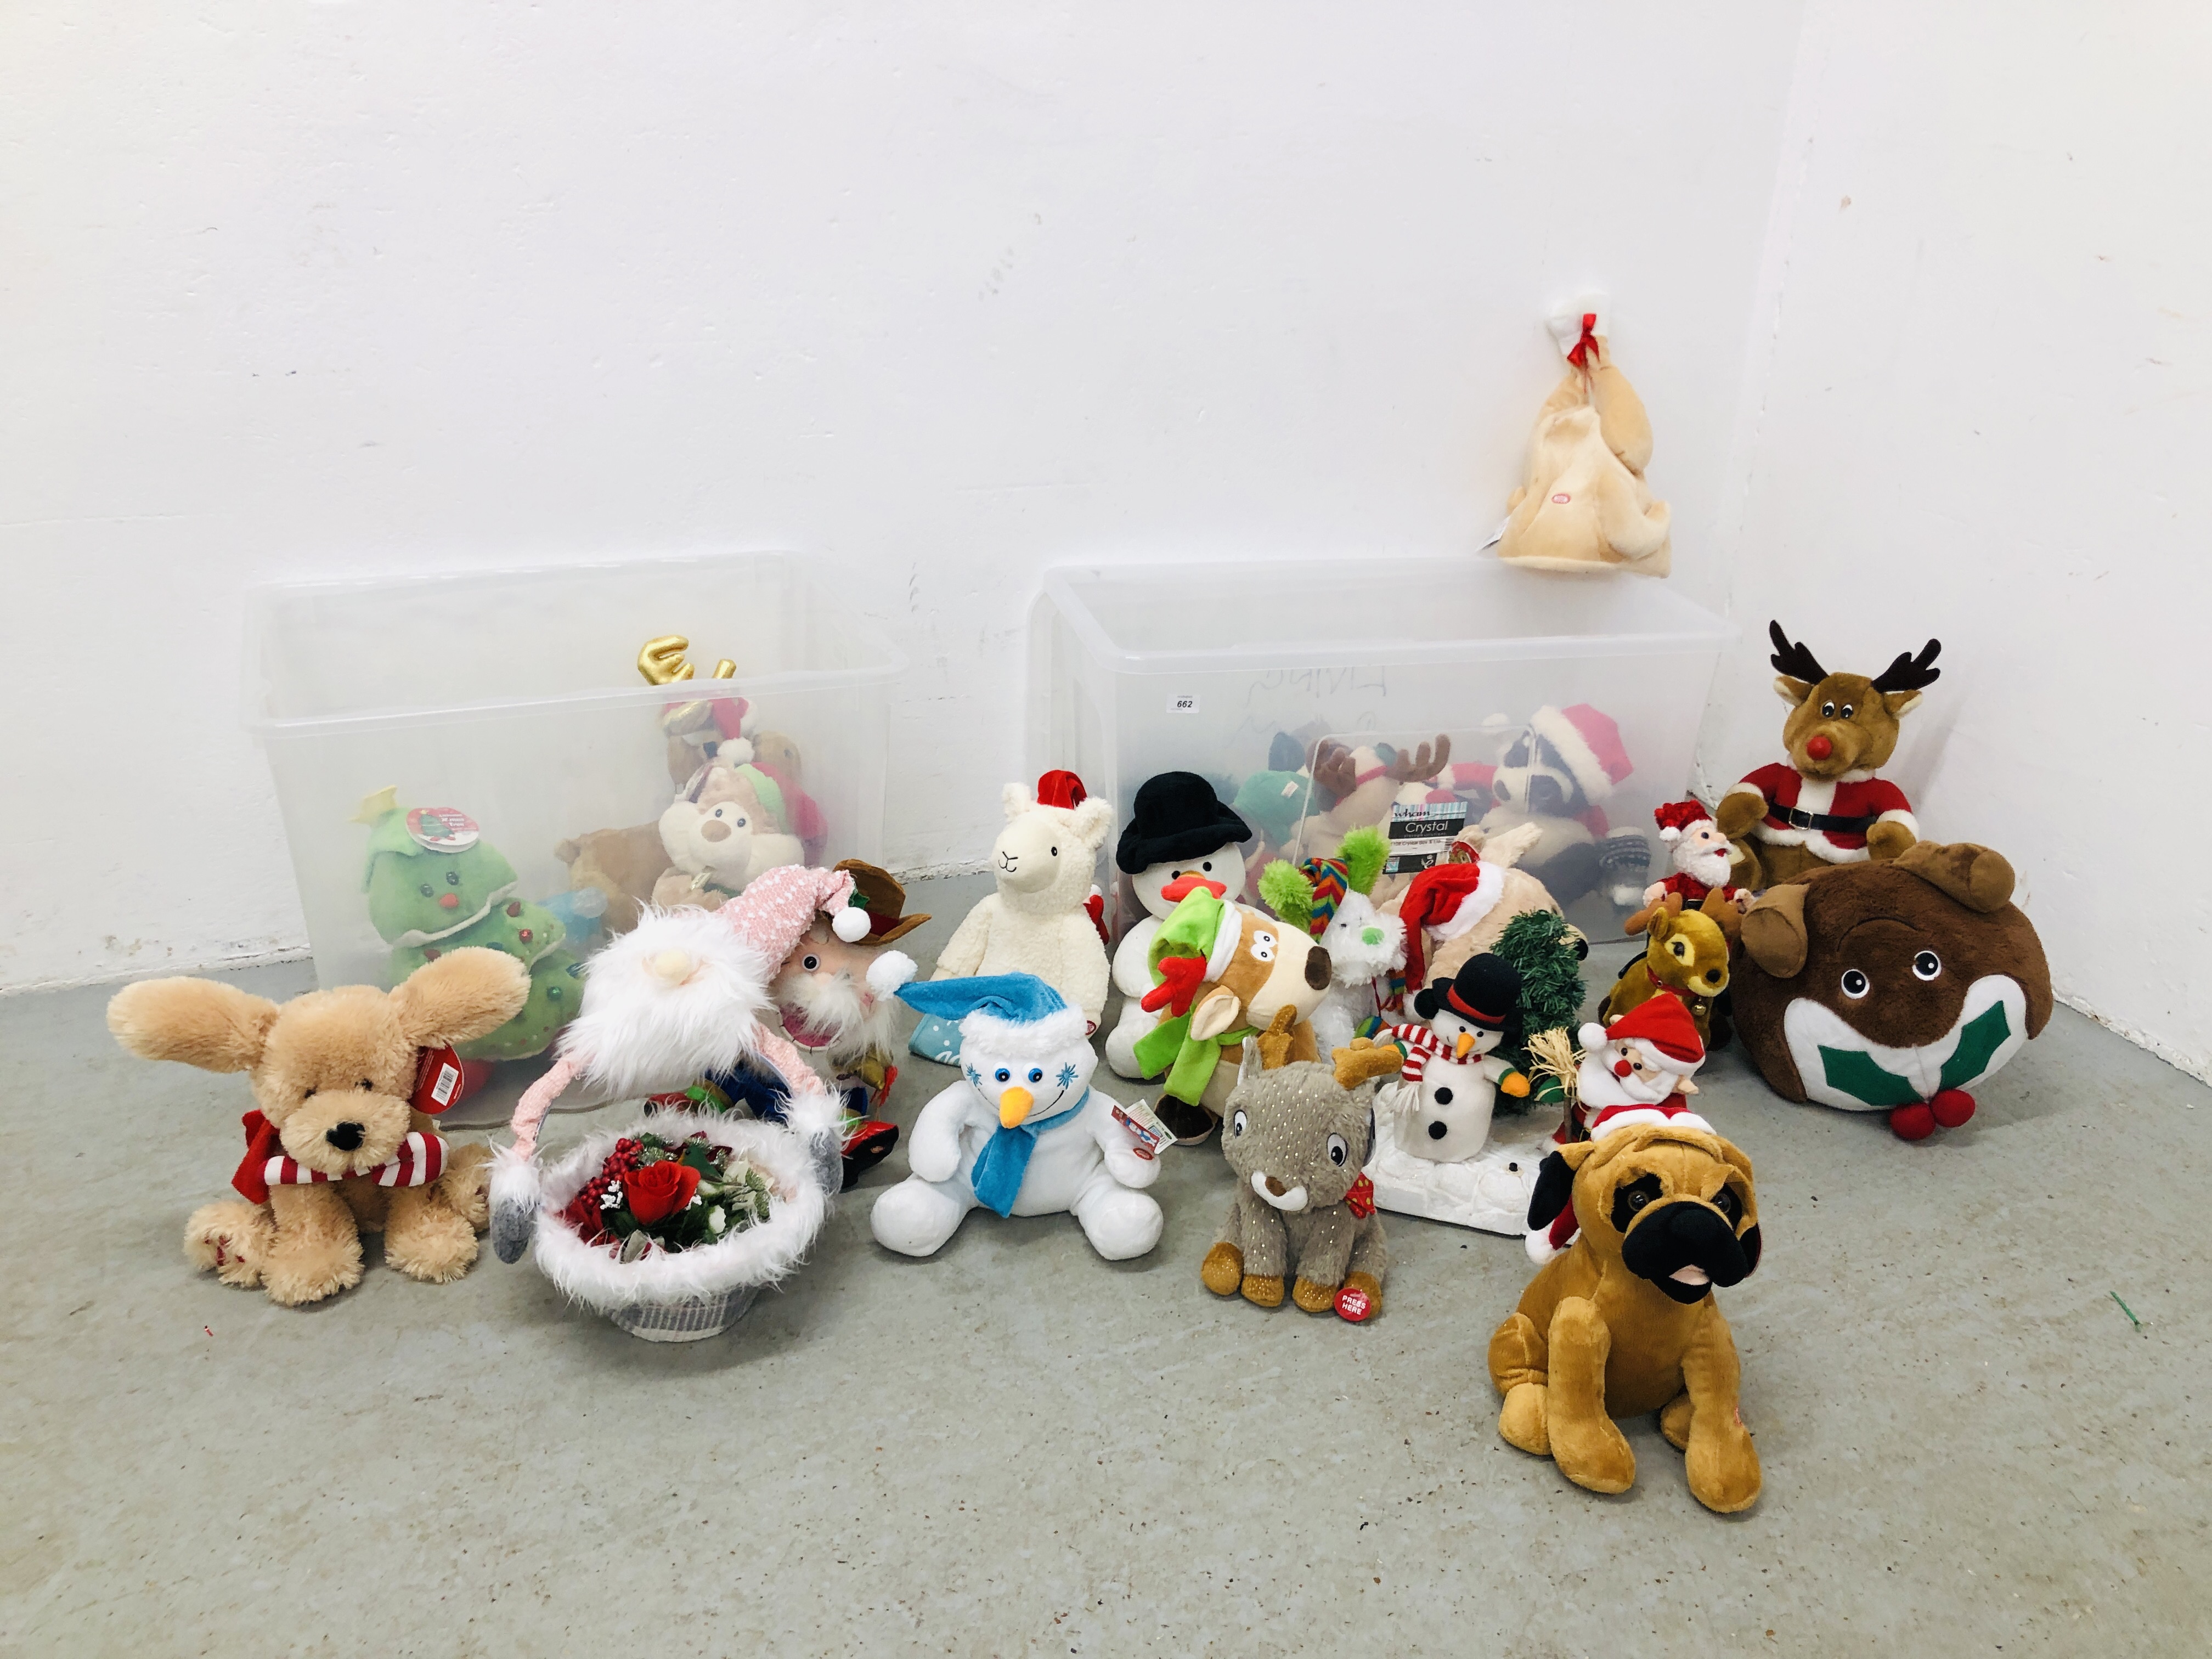 2 LARGE BOXES CONTAINING APPROXIMATELY 30 SOFT CHRISTMAS CHARACTERS,